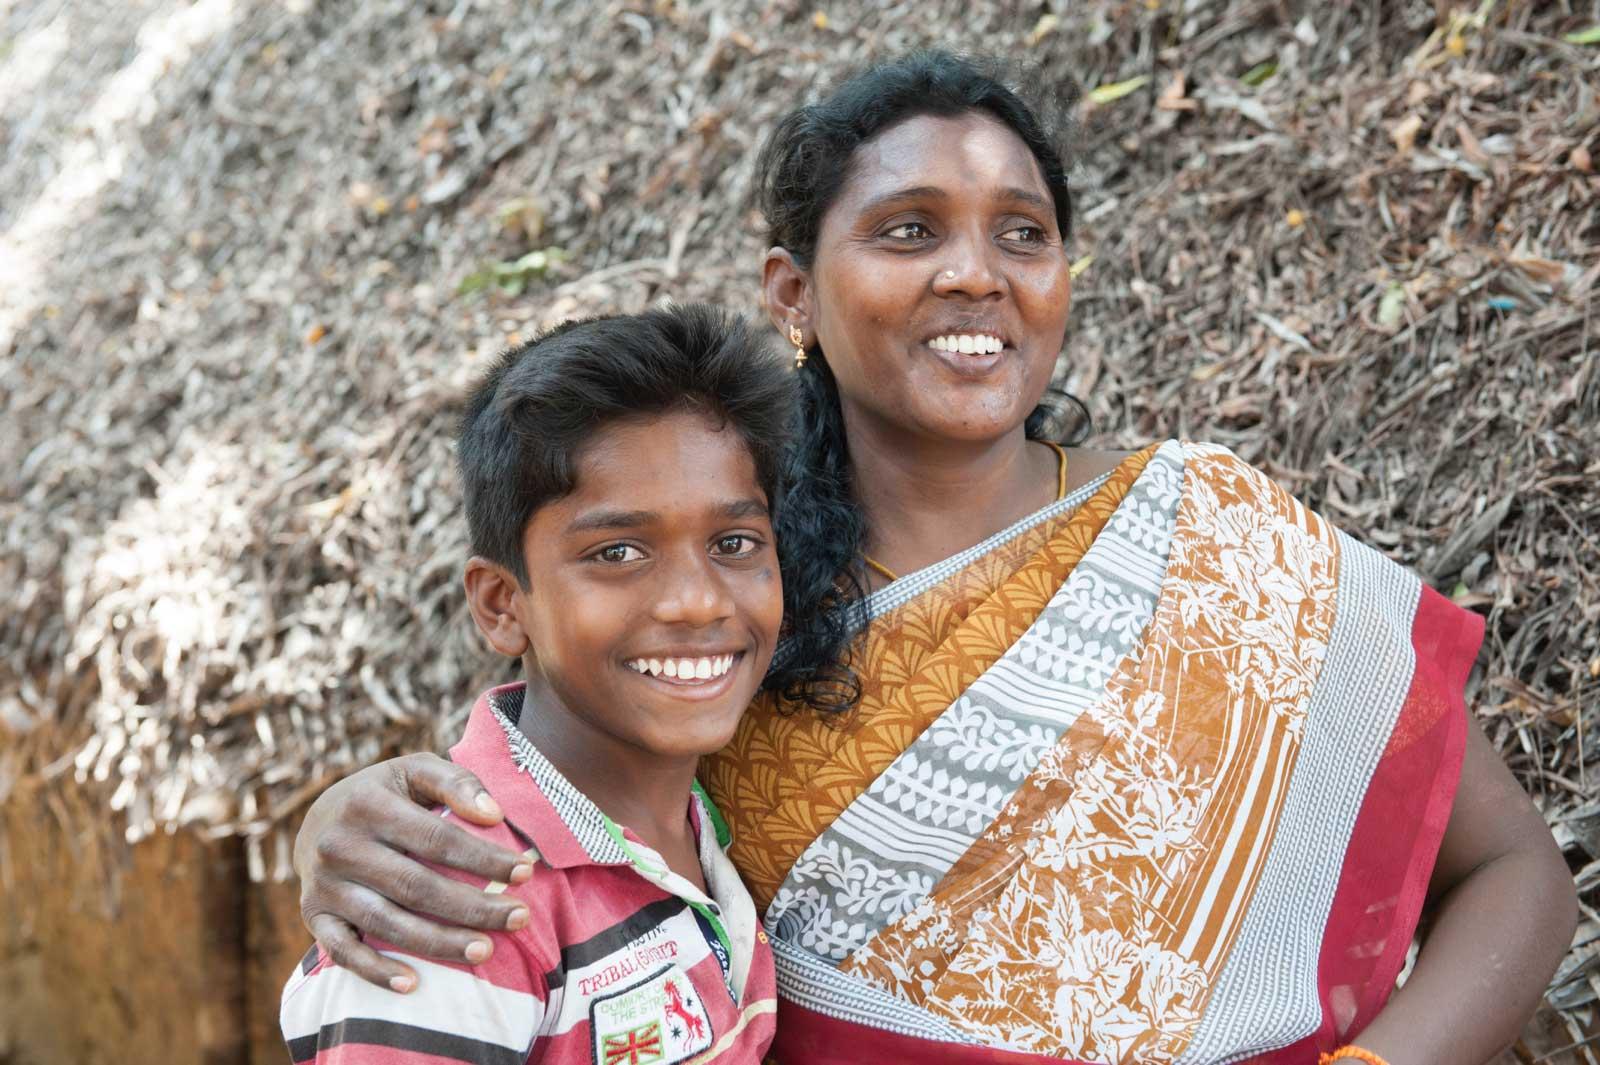 Balachandran with his mother, both look happy